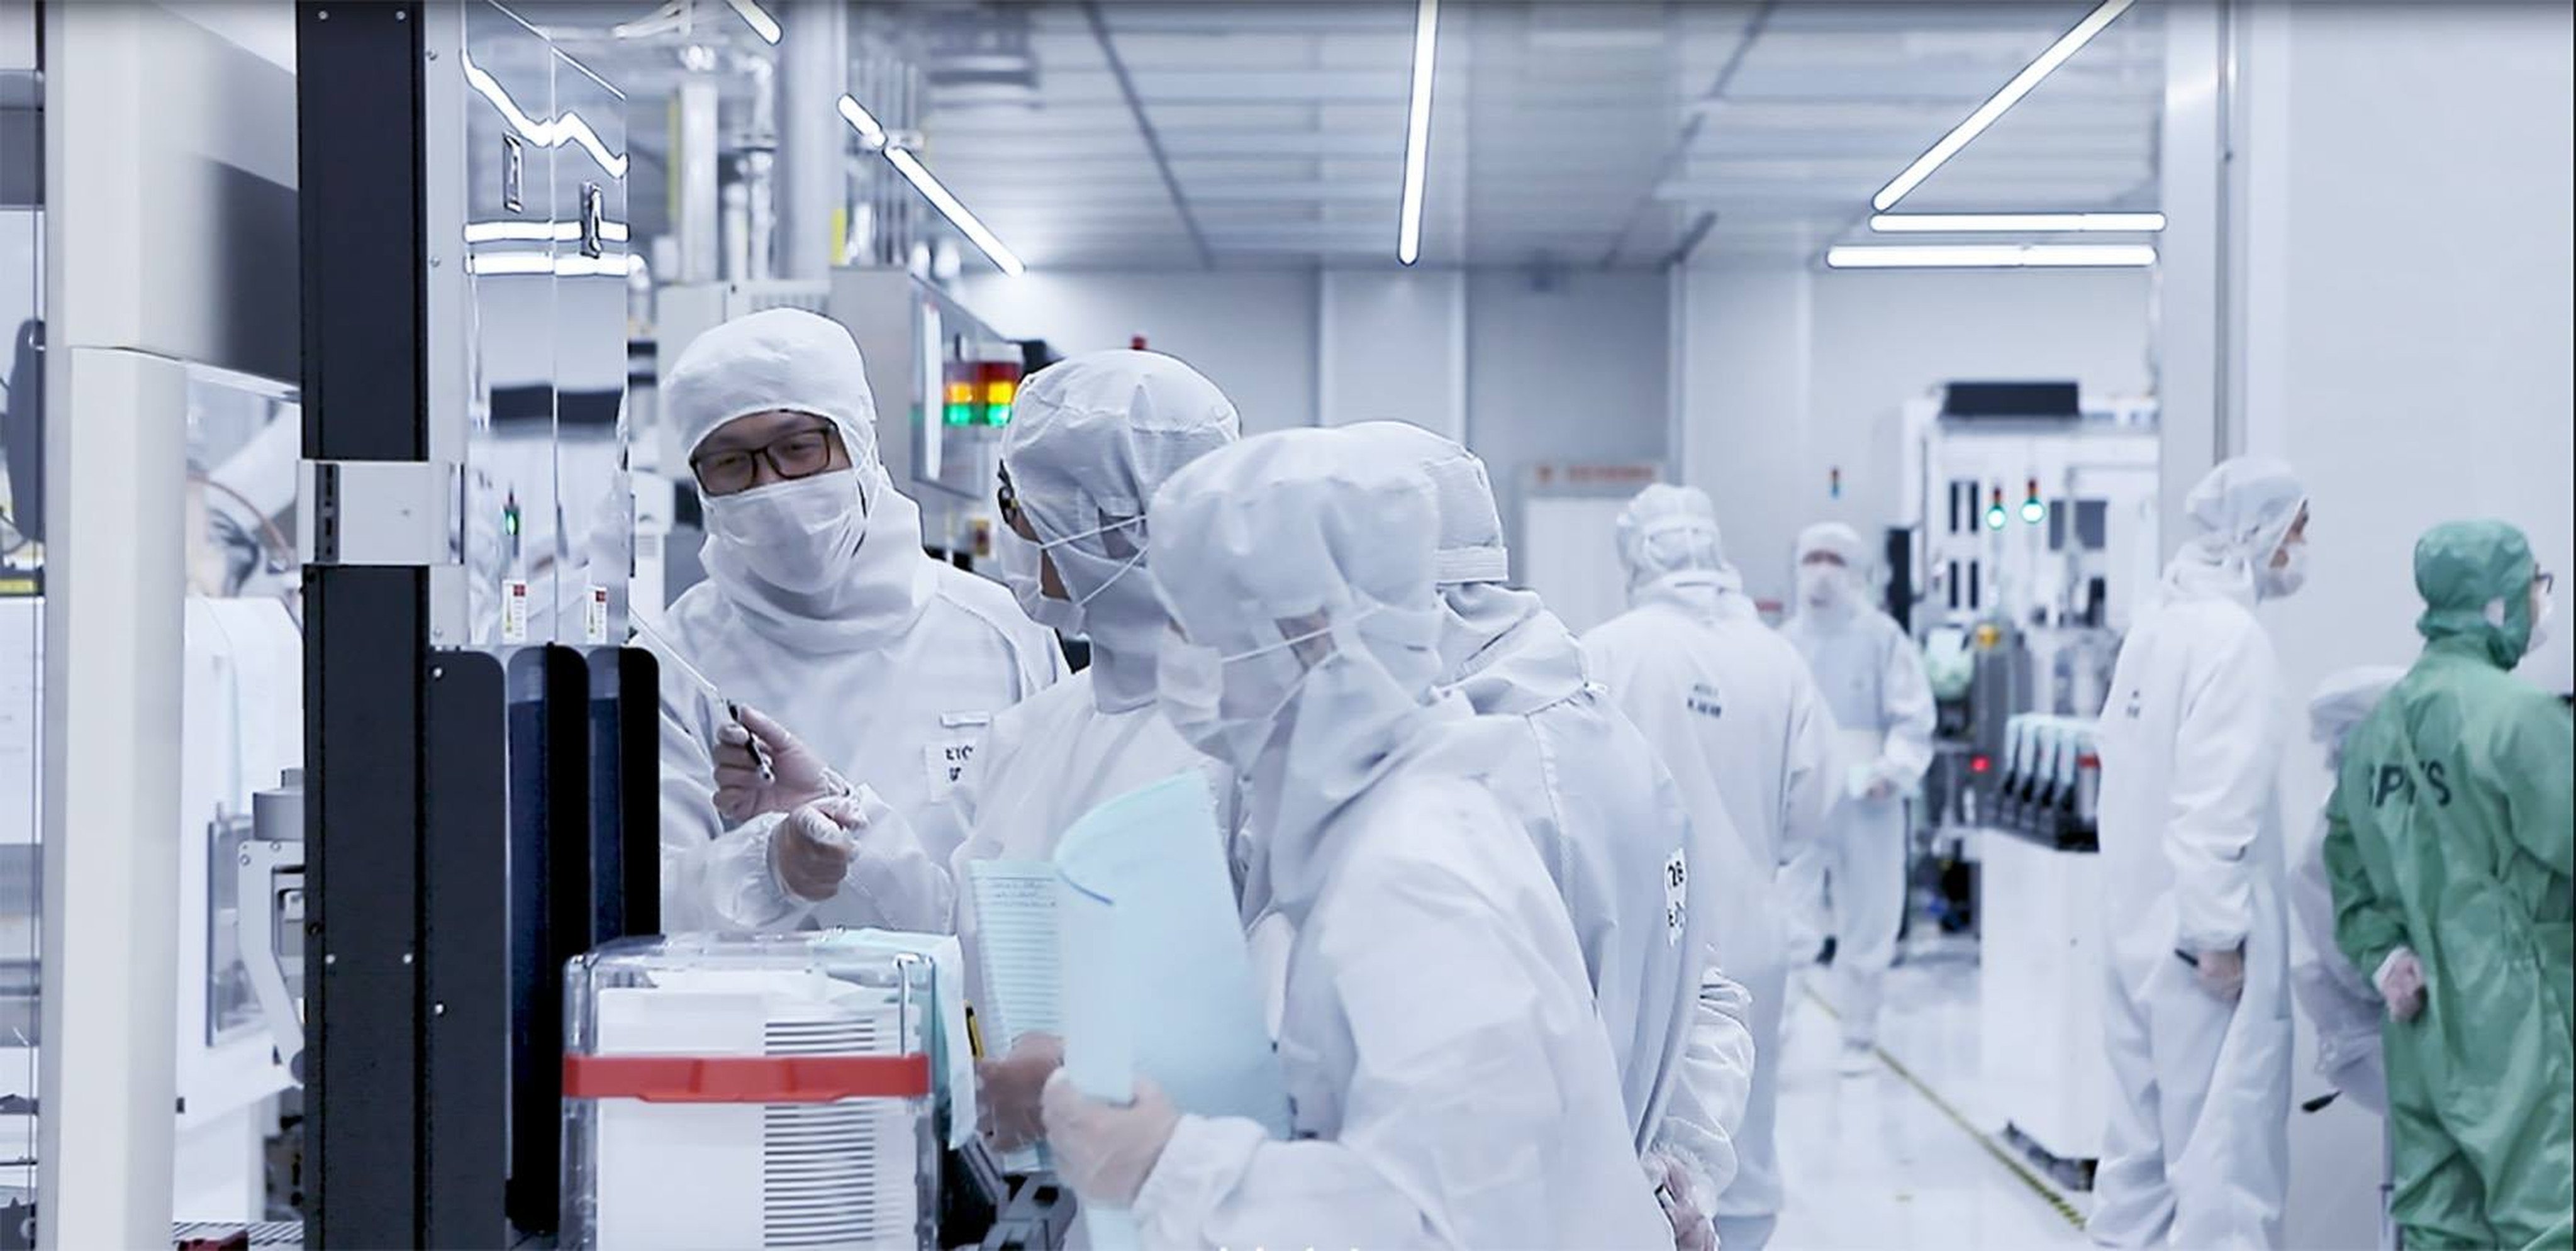 Workers are seen inside a cleanroom at chip maker Ningbo Semiconductor International Corp in eastern Zhejiang province. Photo: Handout